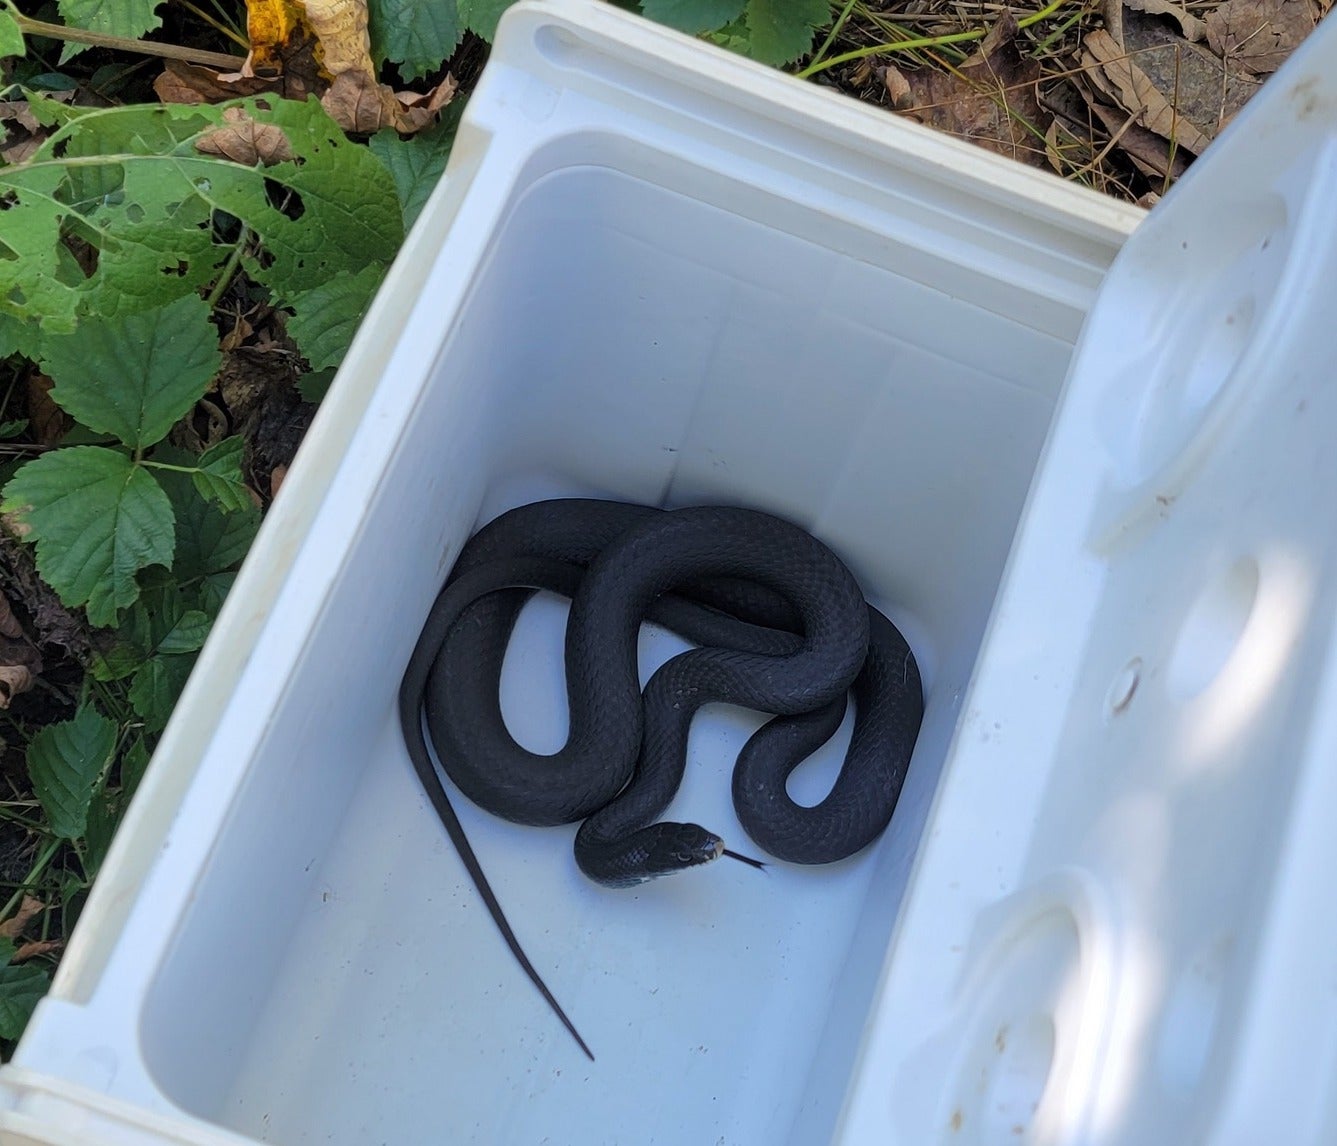 Snake found in toilet safely removed by police, Trending